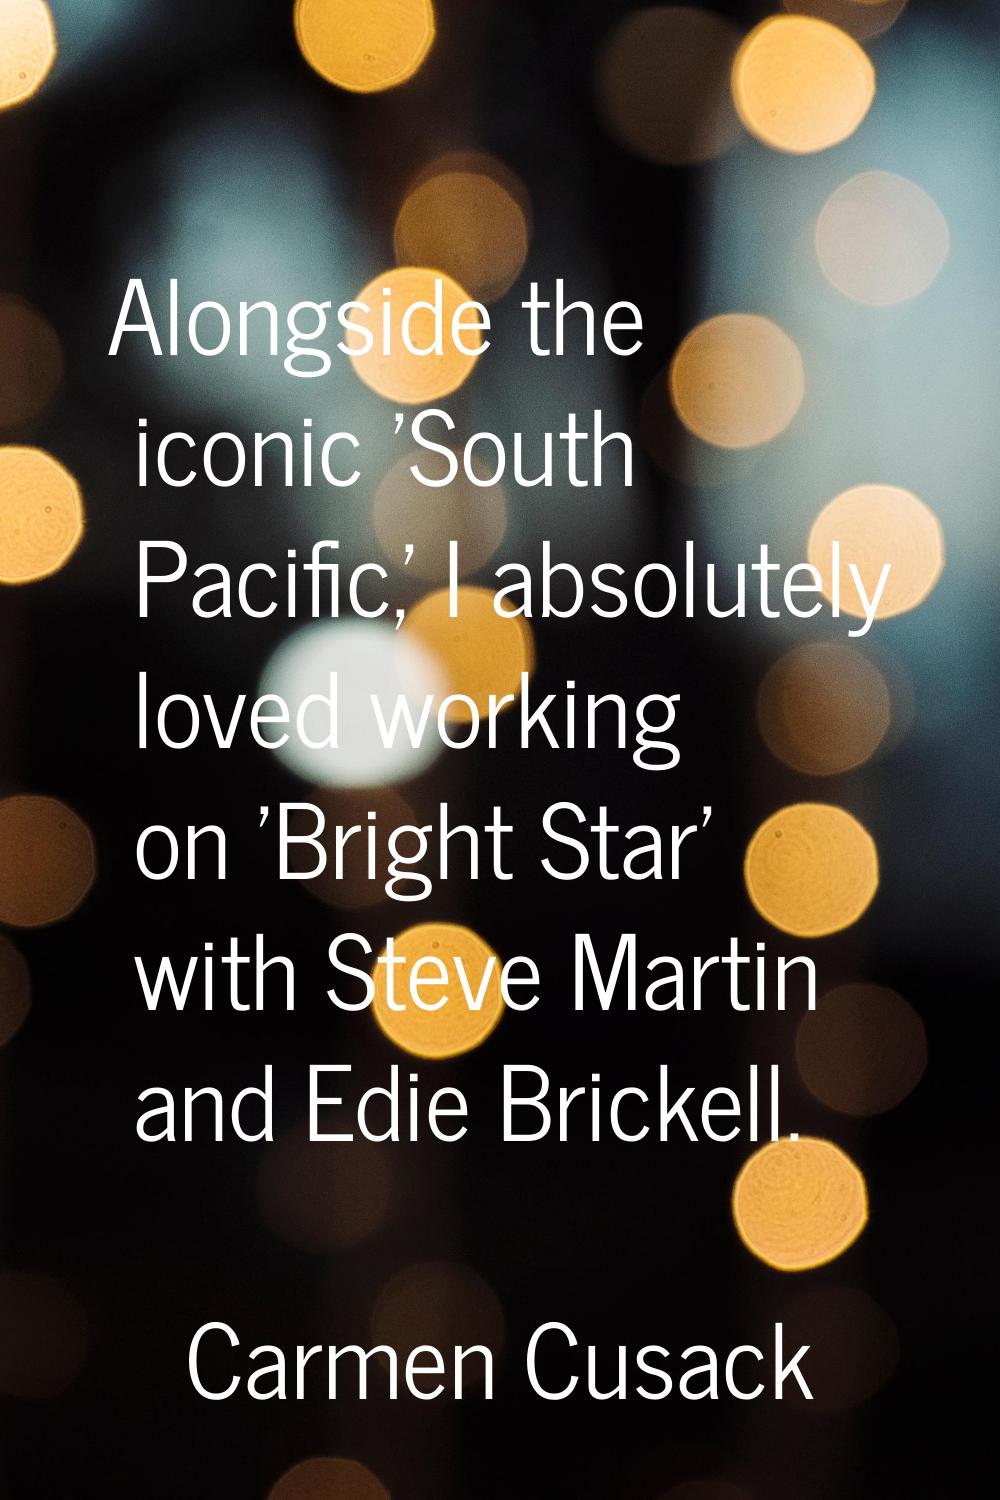 Alongside the iconic 'South Pacific,' I absolutely loved working on 'Bright Star' with Steve Martin